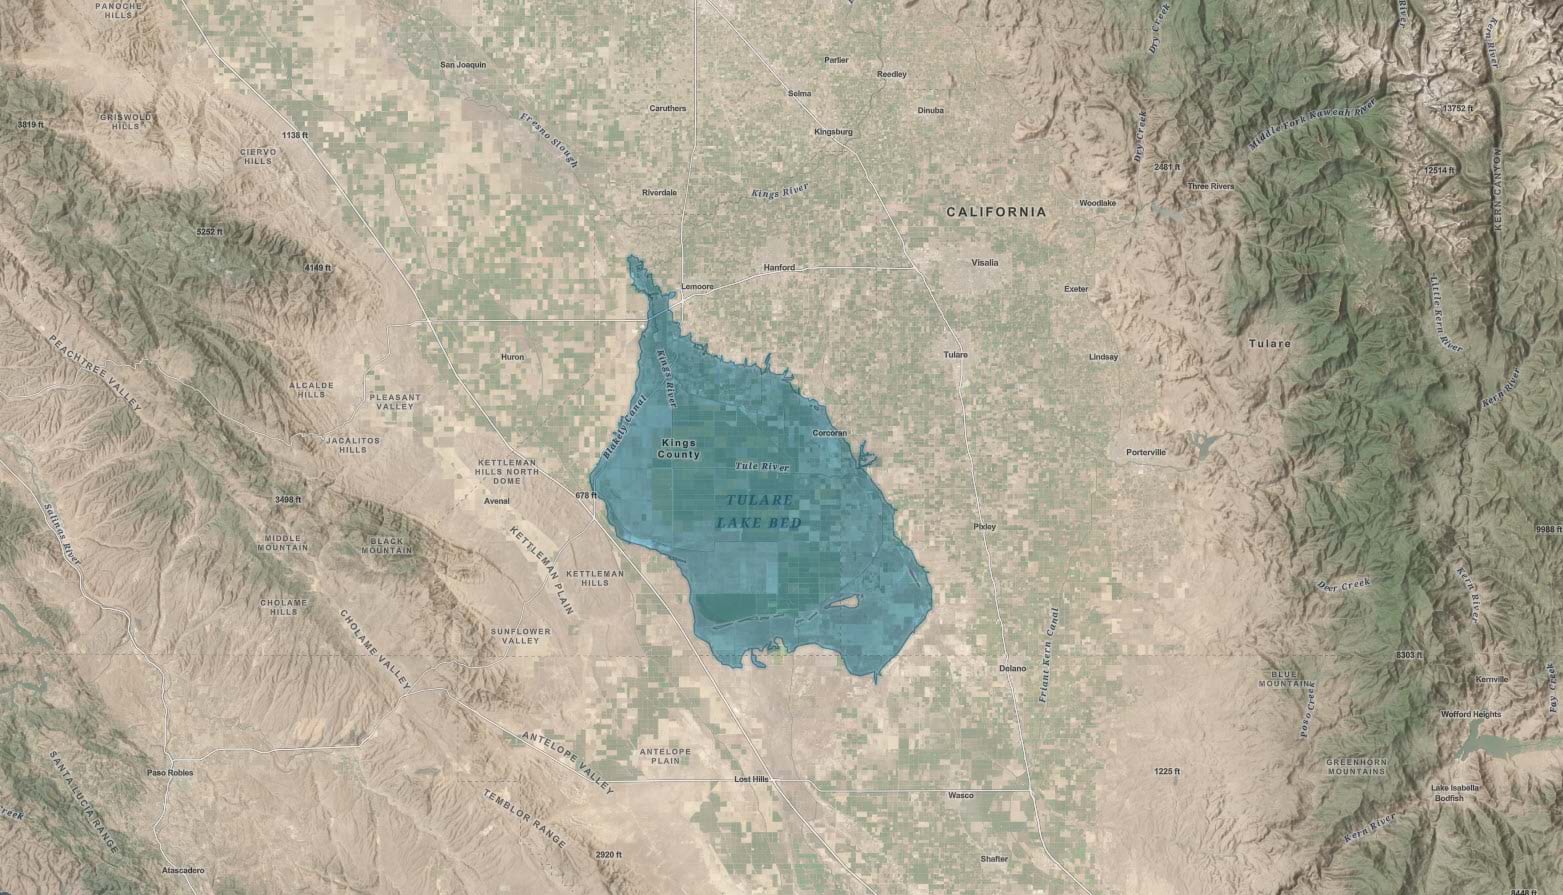 The final map showing Tulare Lake and the modified six basemaps.